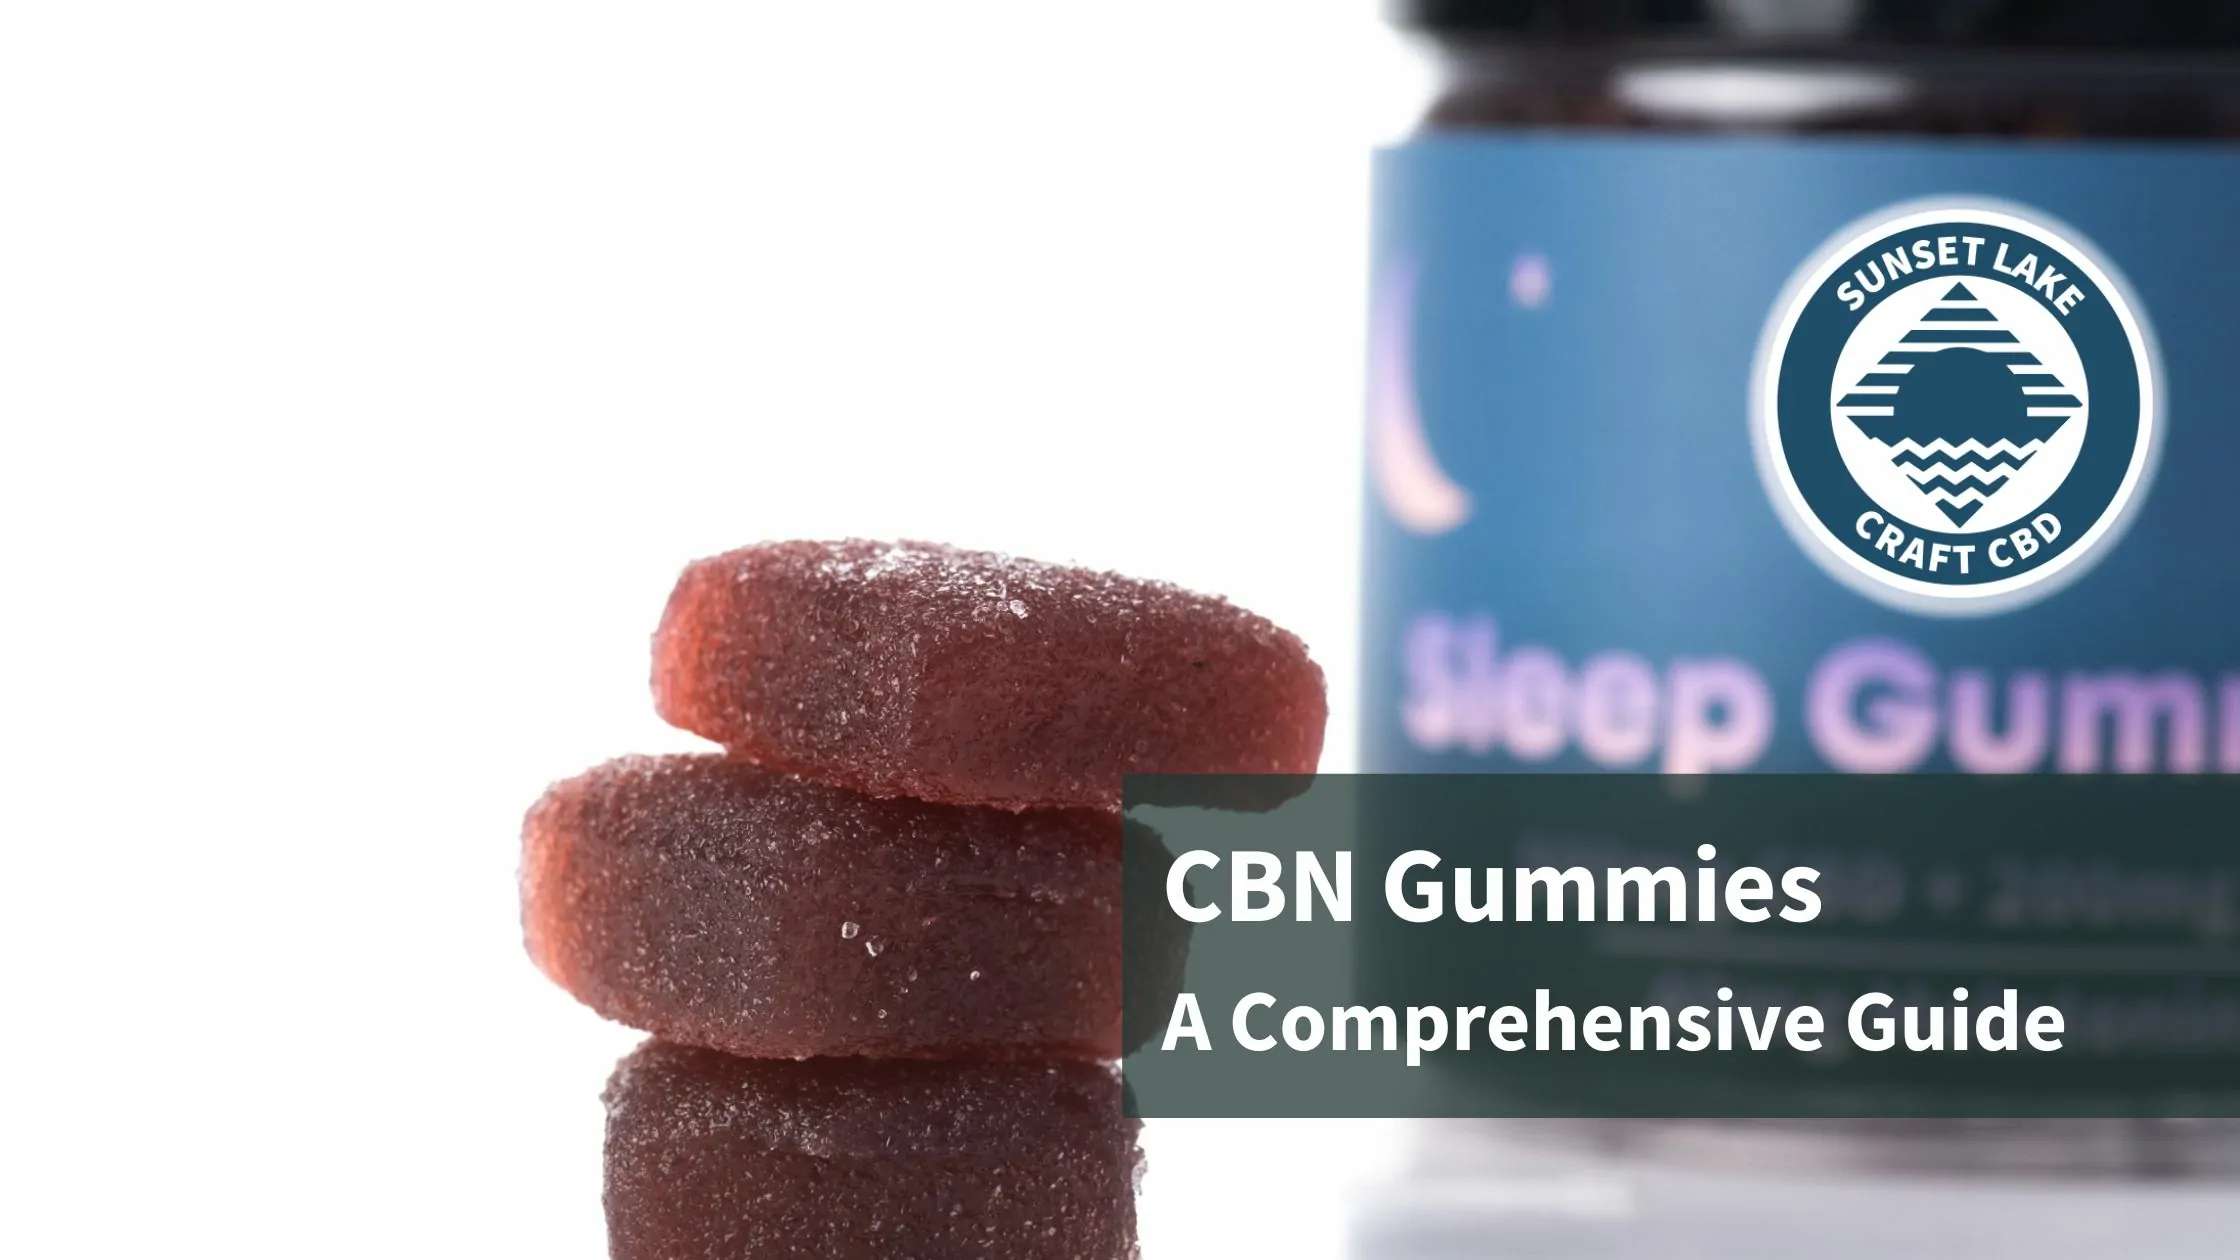 What Are CBN Gummies and What Do They Do? [A Comprehensive Guide]